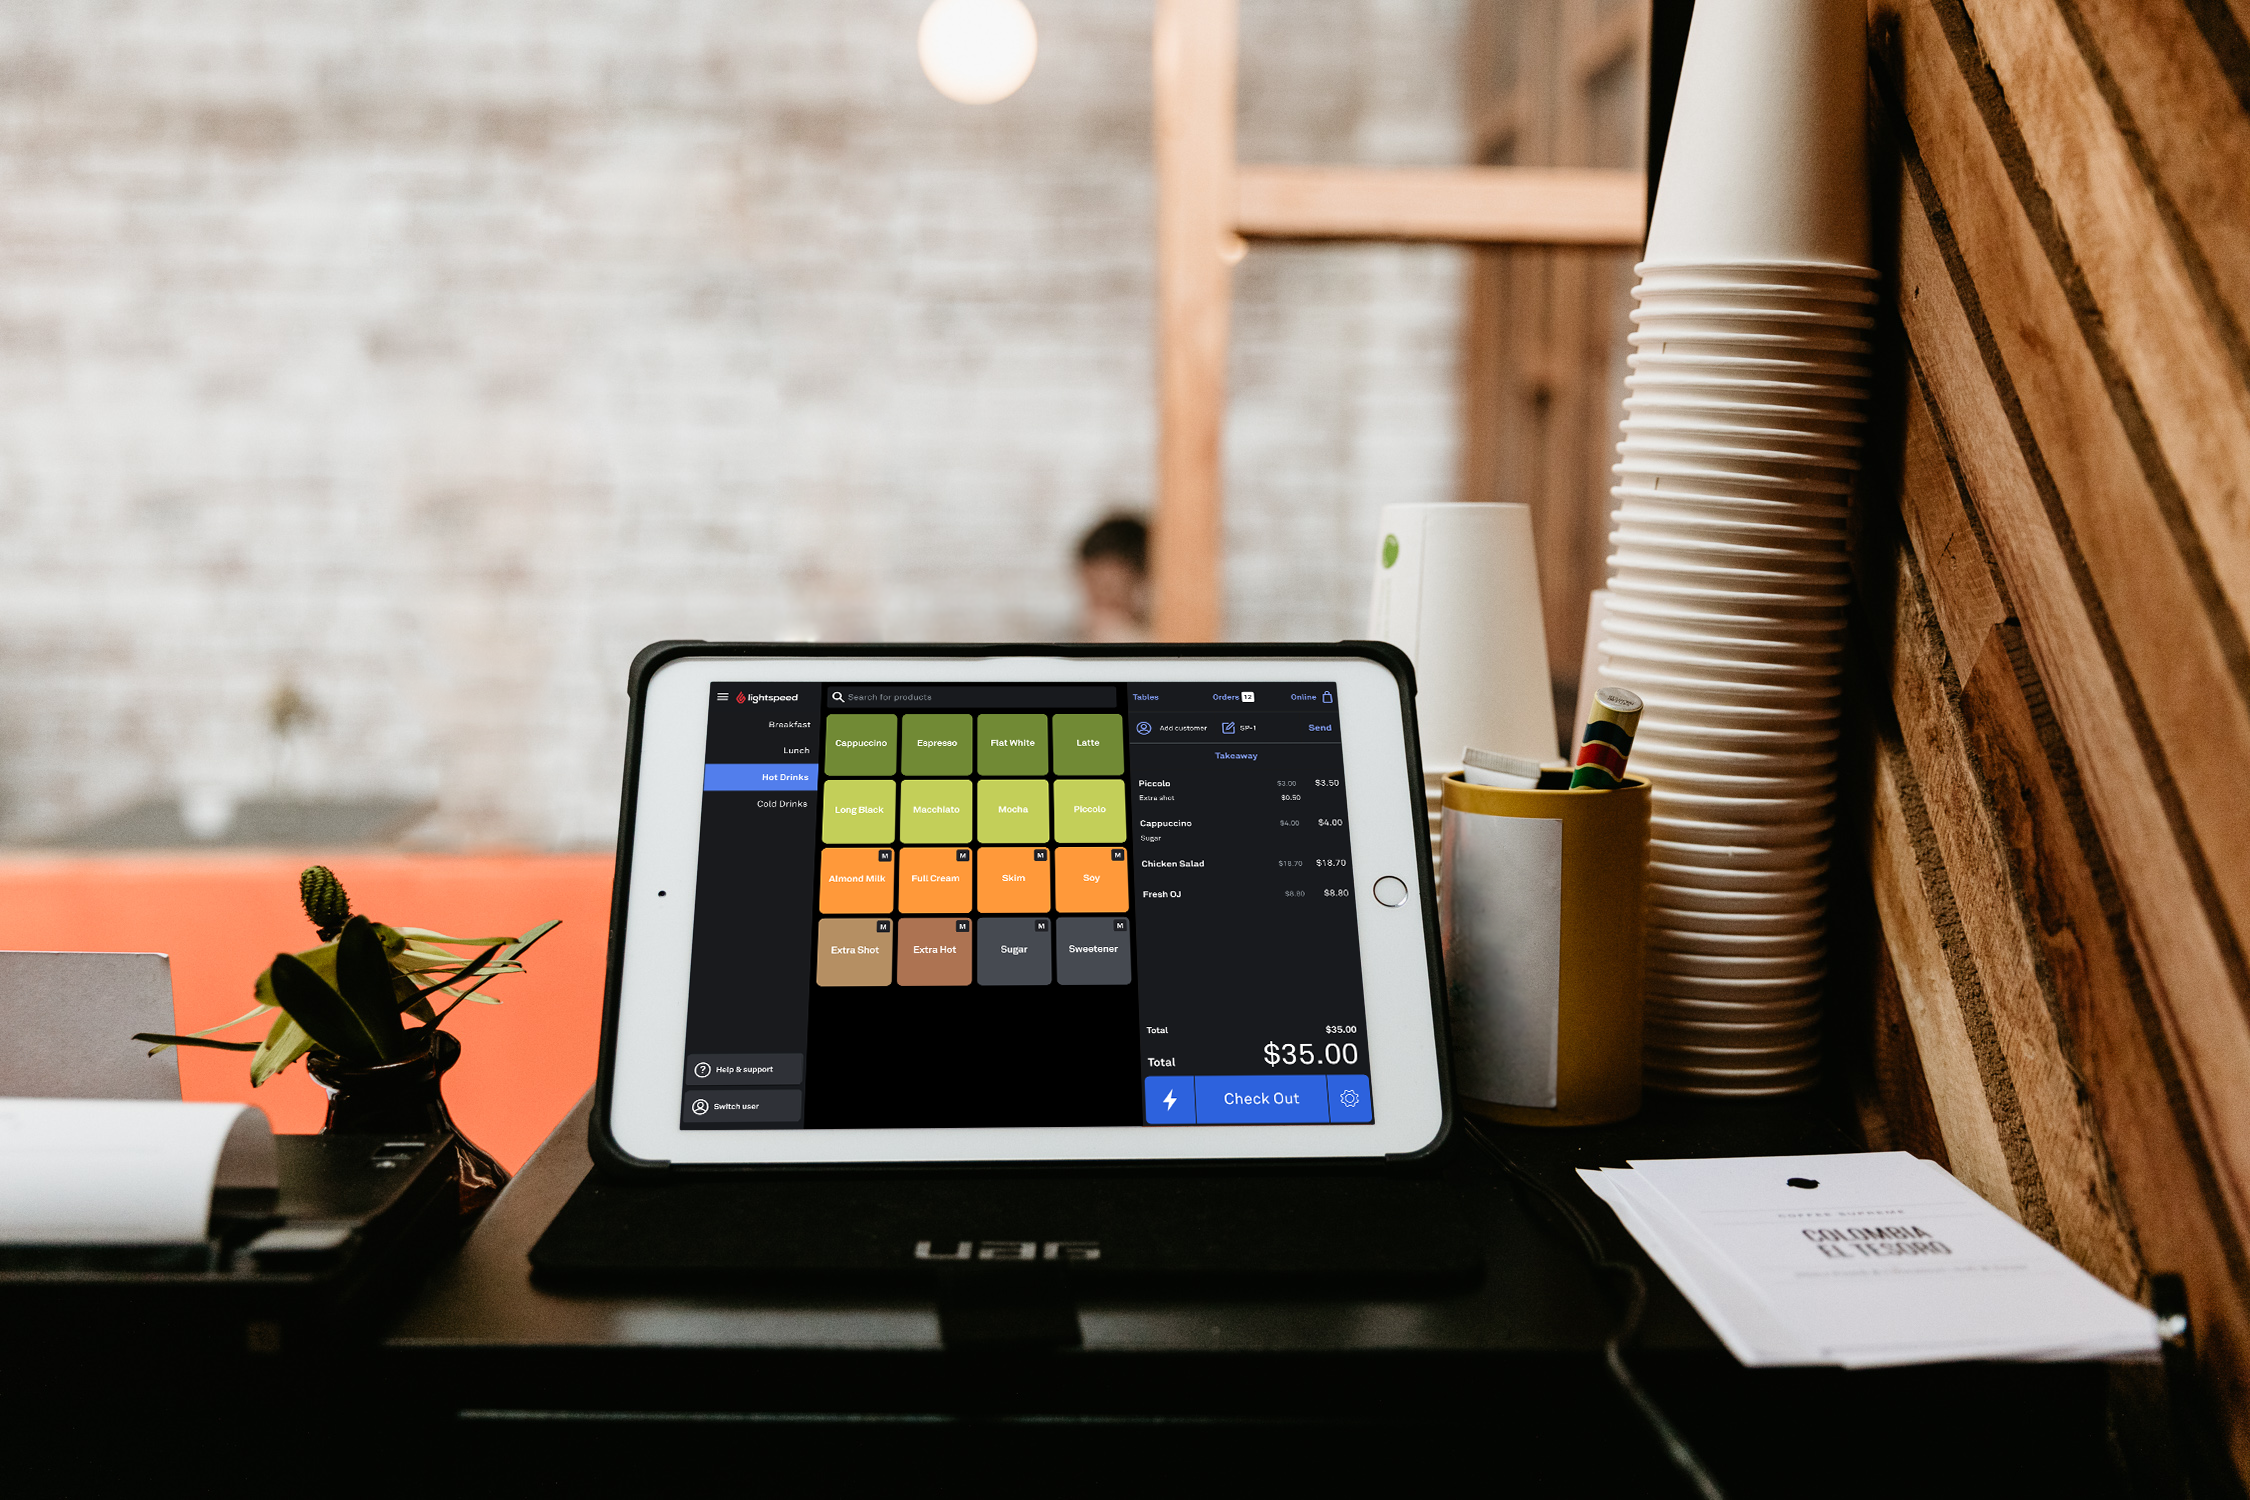 Lightspeed POS Software - Built for restaurants, bars, cafes, bakeries, breweries and everything in-between!